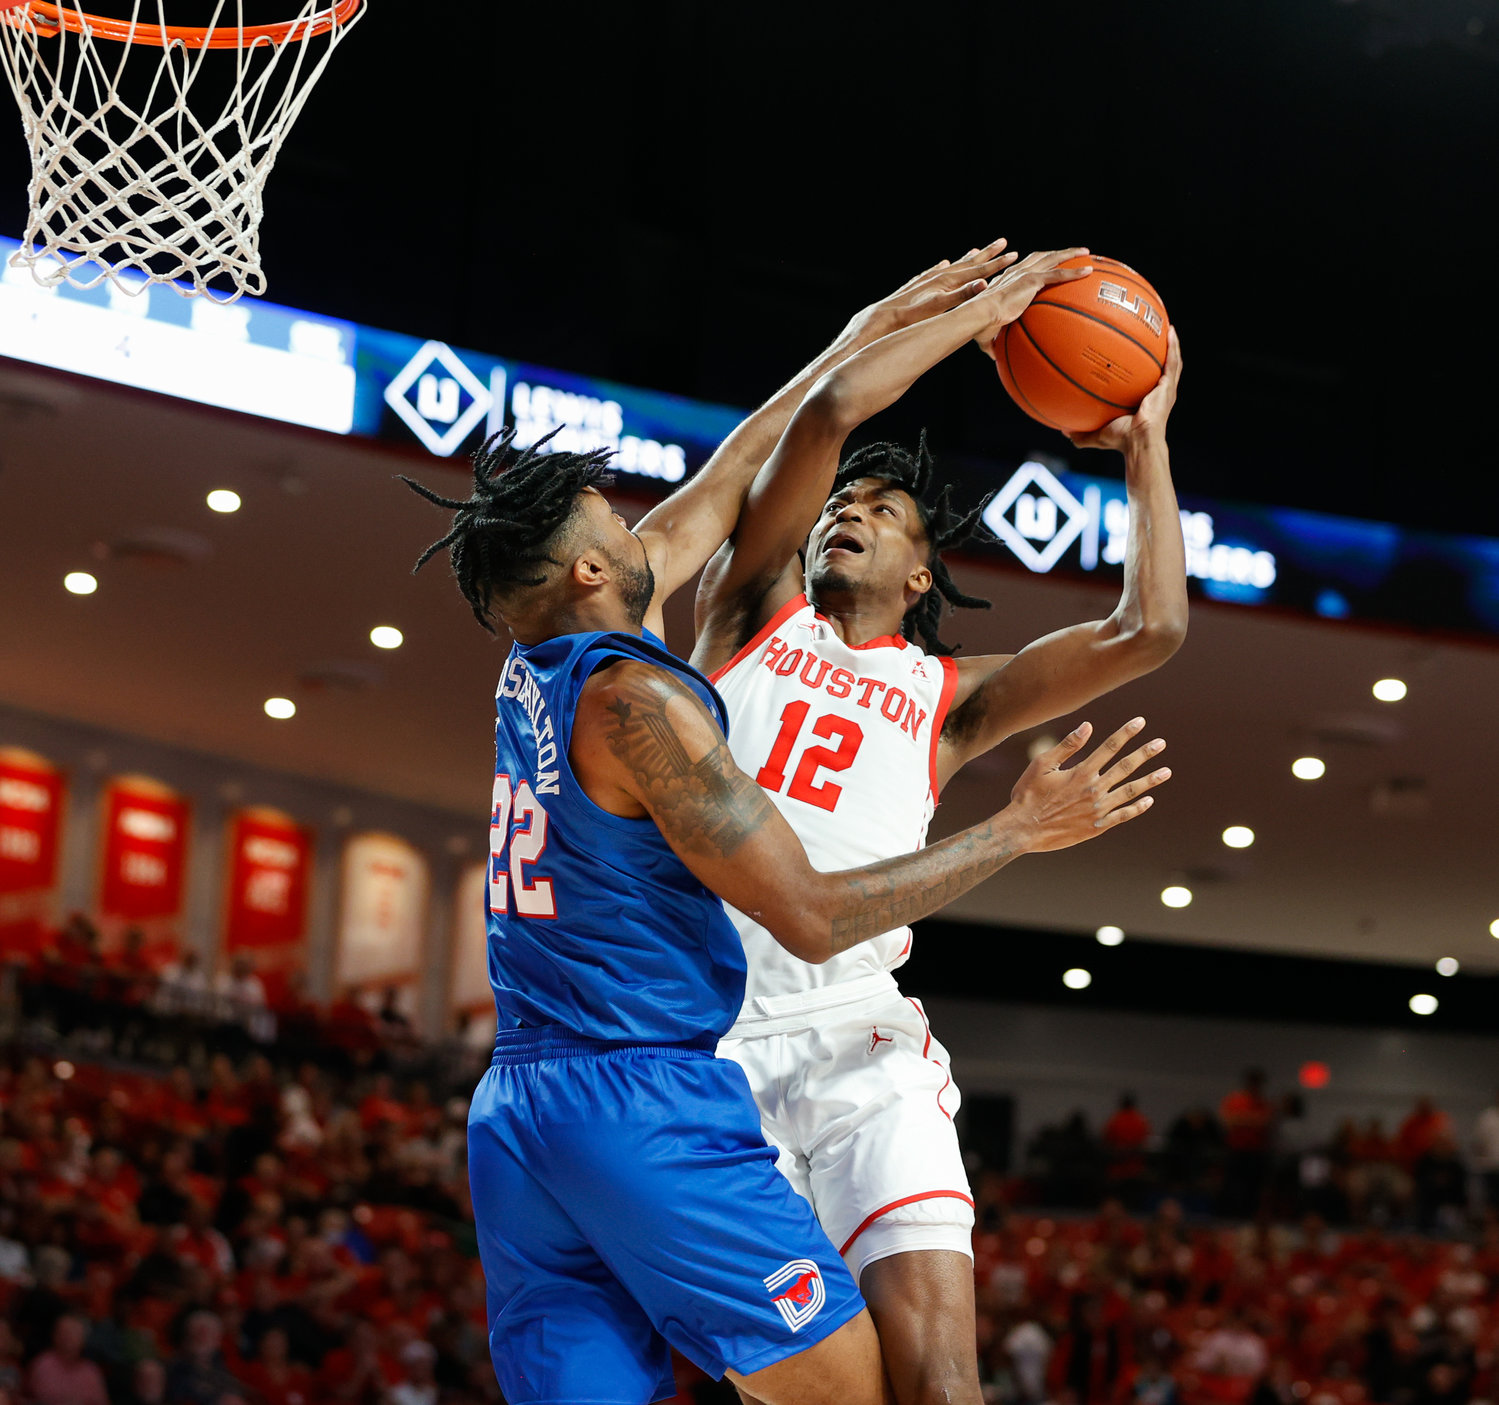 Houston guard Tramon Mark (12) goes to the basket against SMU forward Keon Ambrose-Hylton (22) during an NCAA men’s basketball game between the Houston Cougars and the Southern Methodist Mustangs on Jan. 5, 2023 in Houston. Houston won, 87-53,